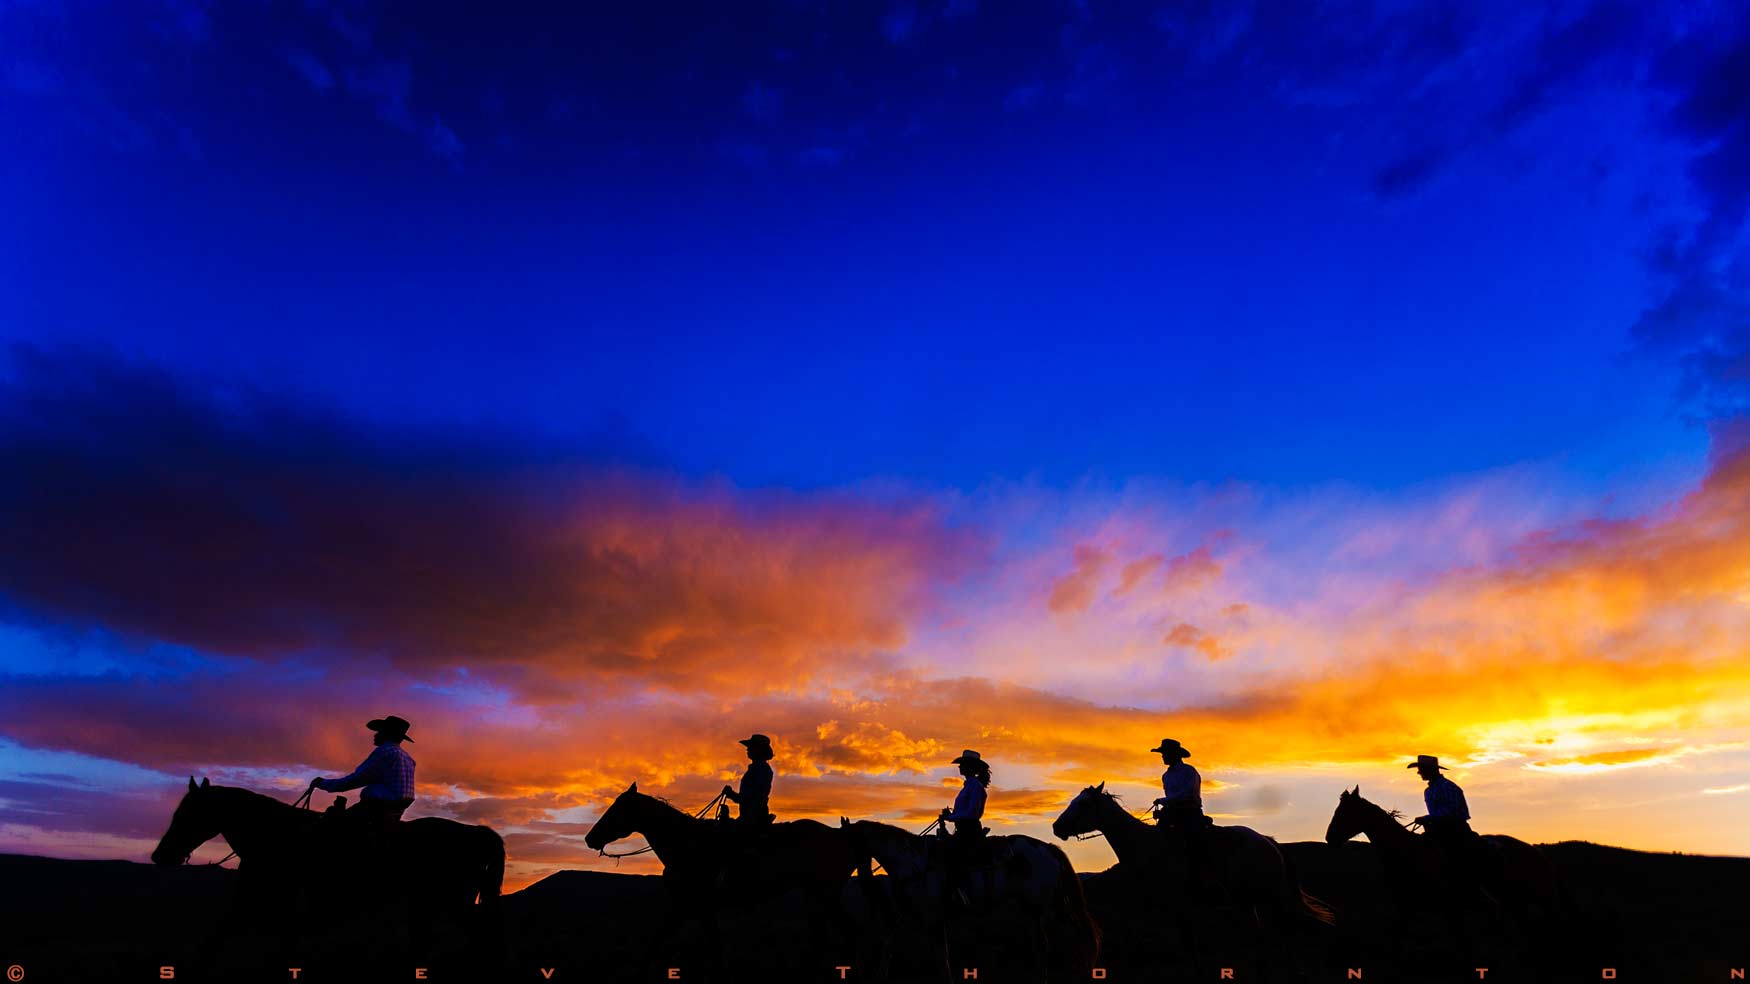 Professional cowboy silhouette lifestyle photographer and director